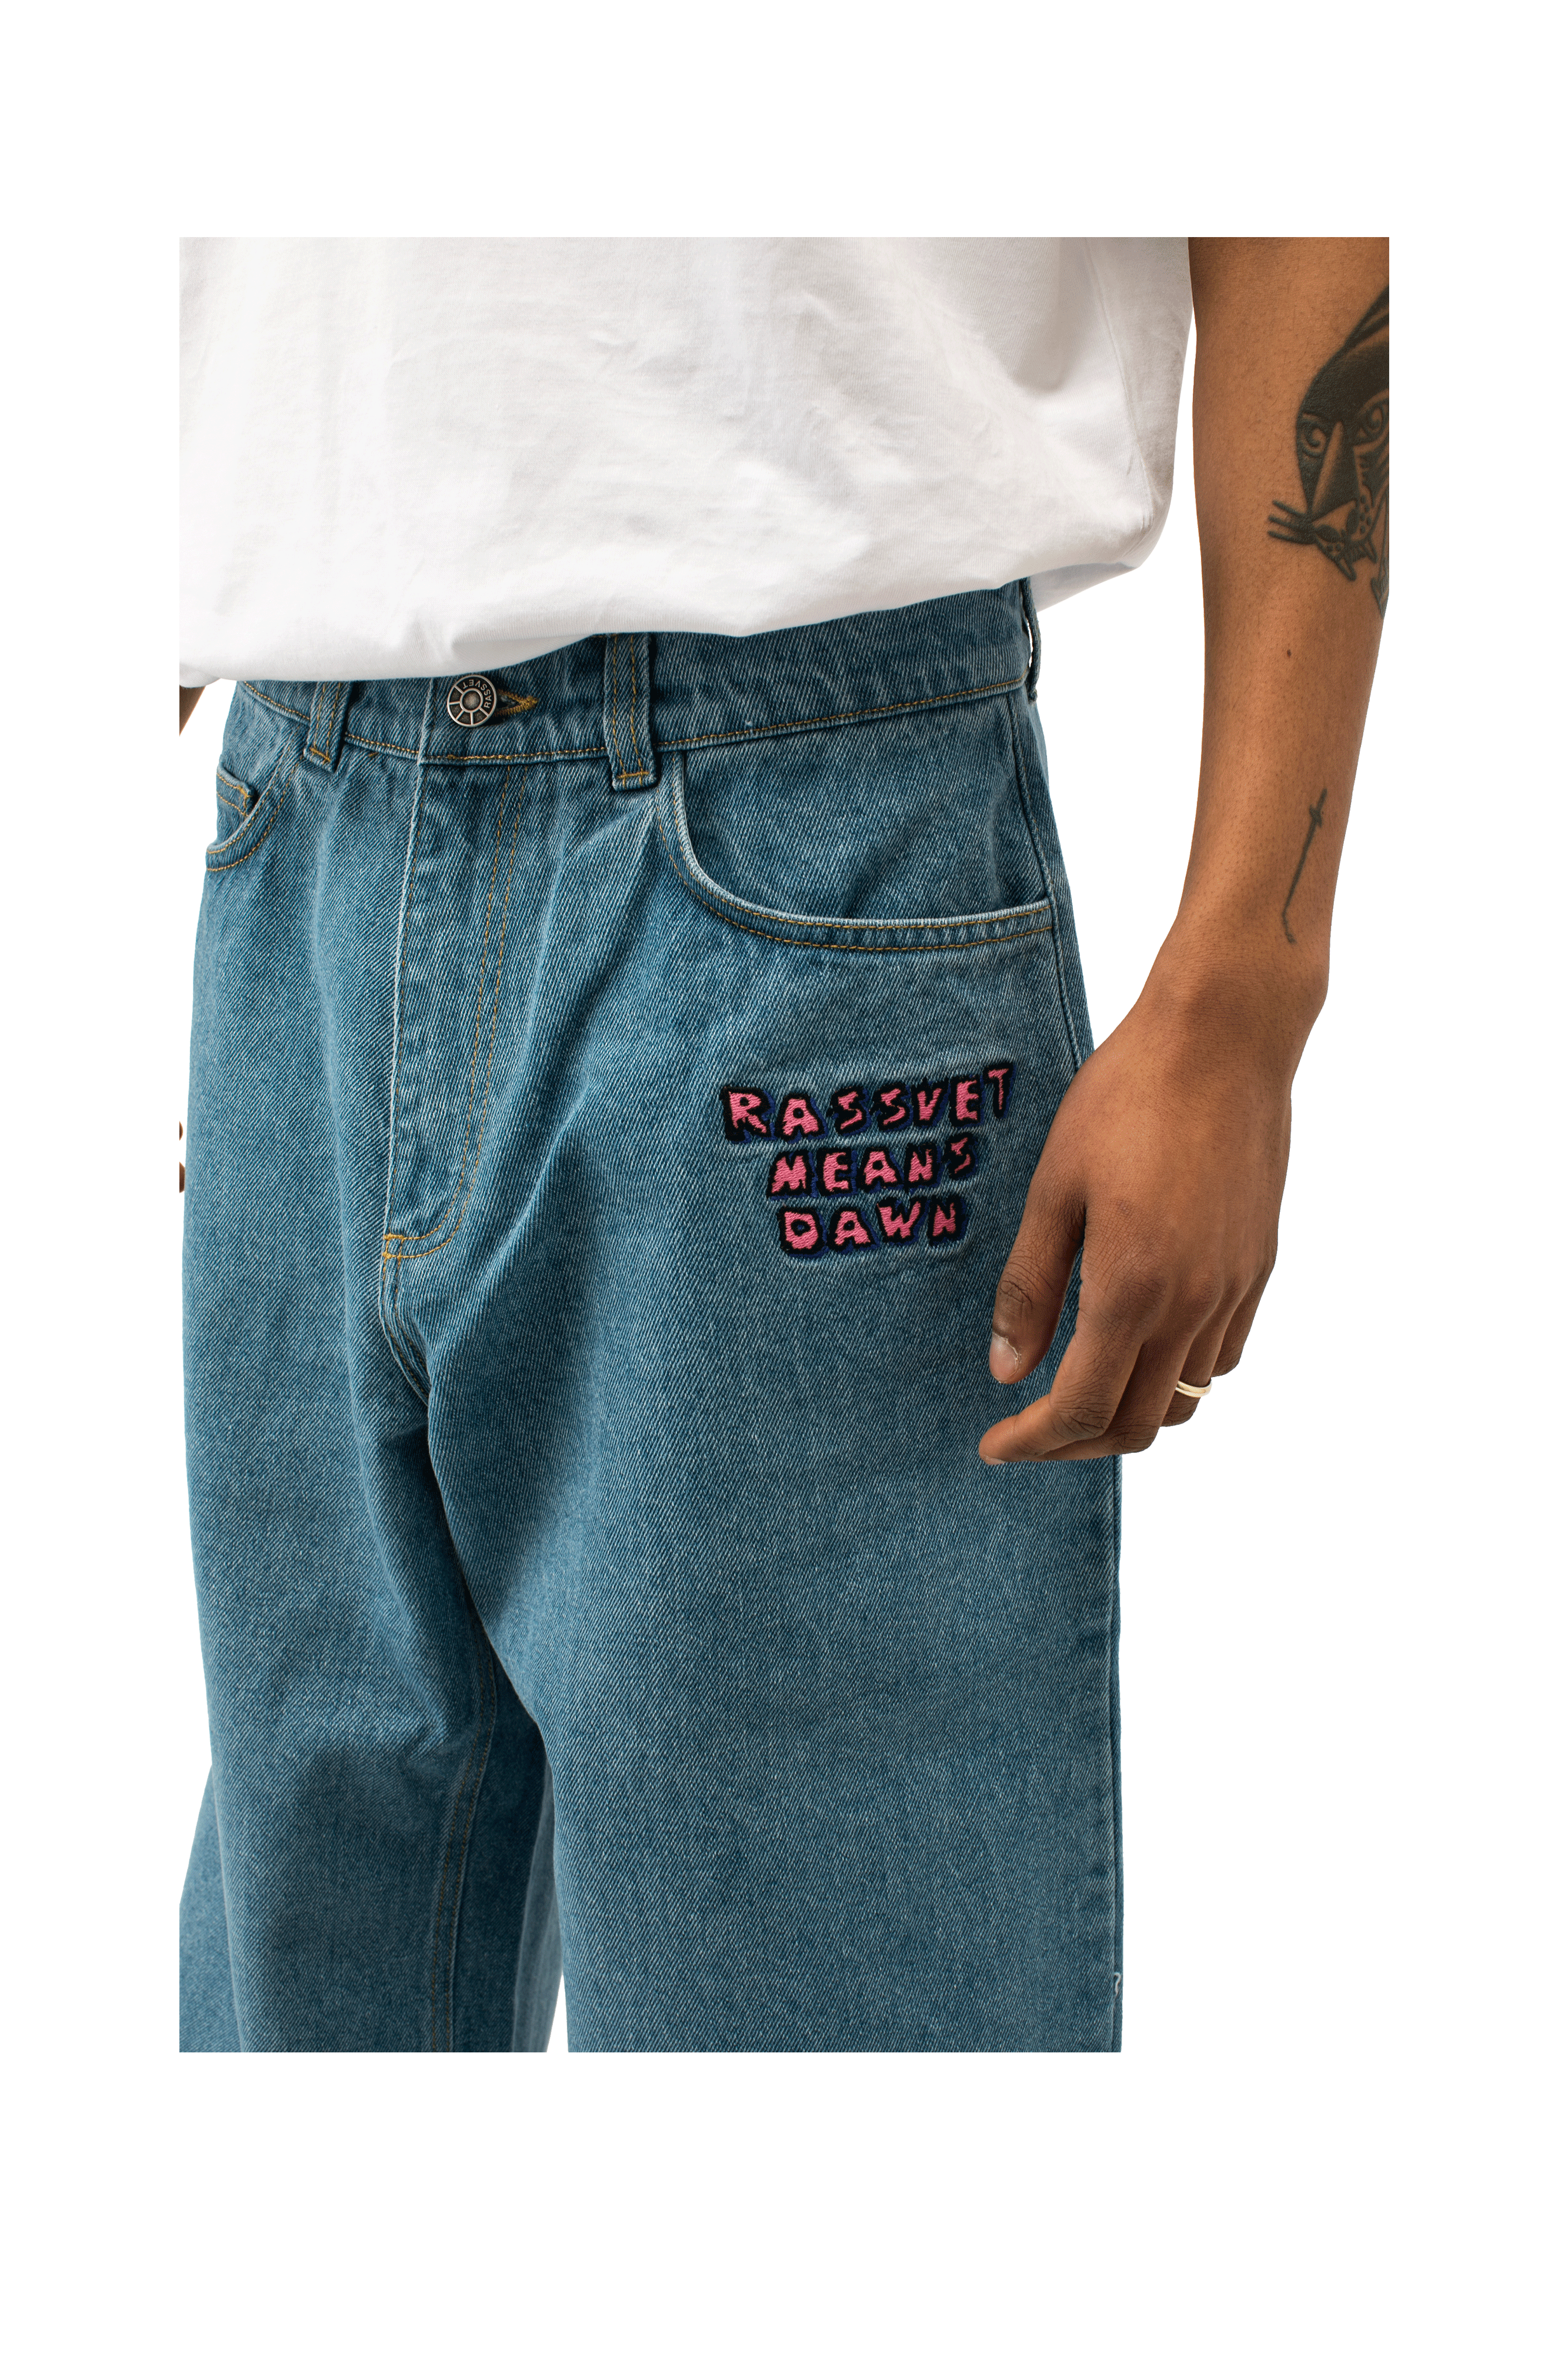 R.M.D Baggy Trousers Woven